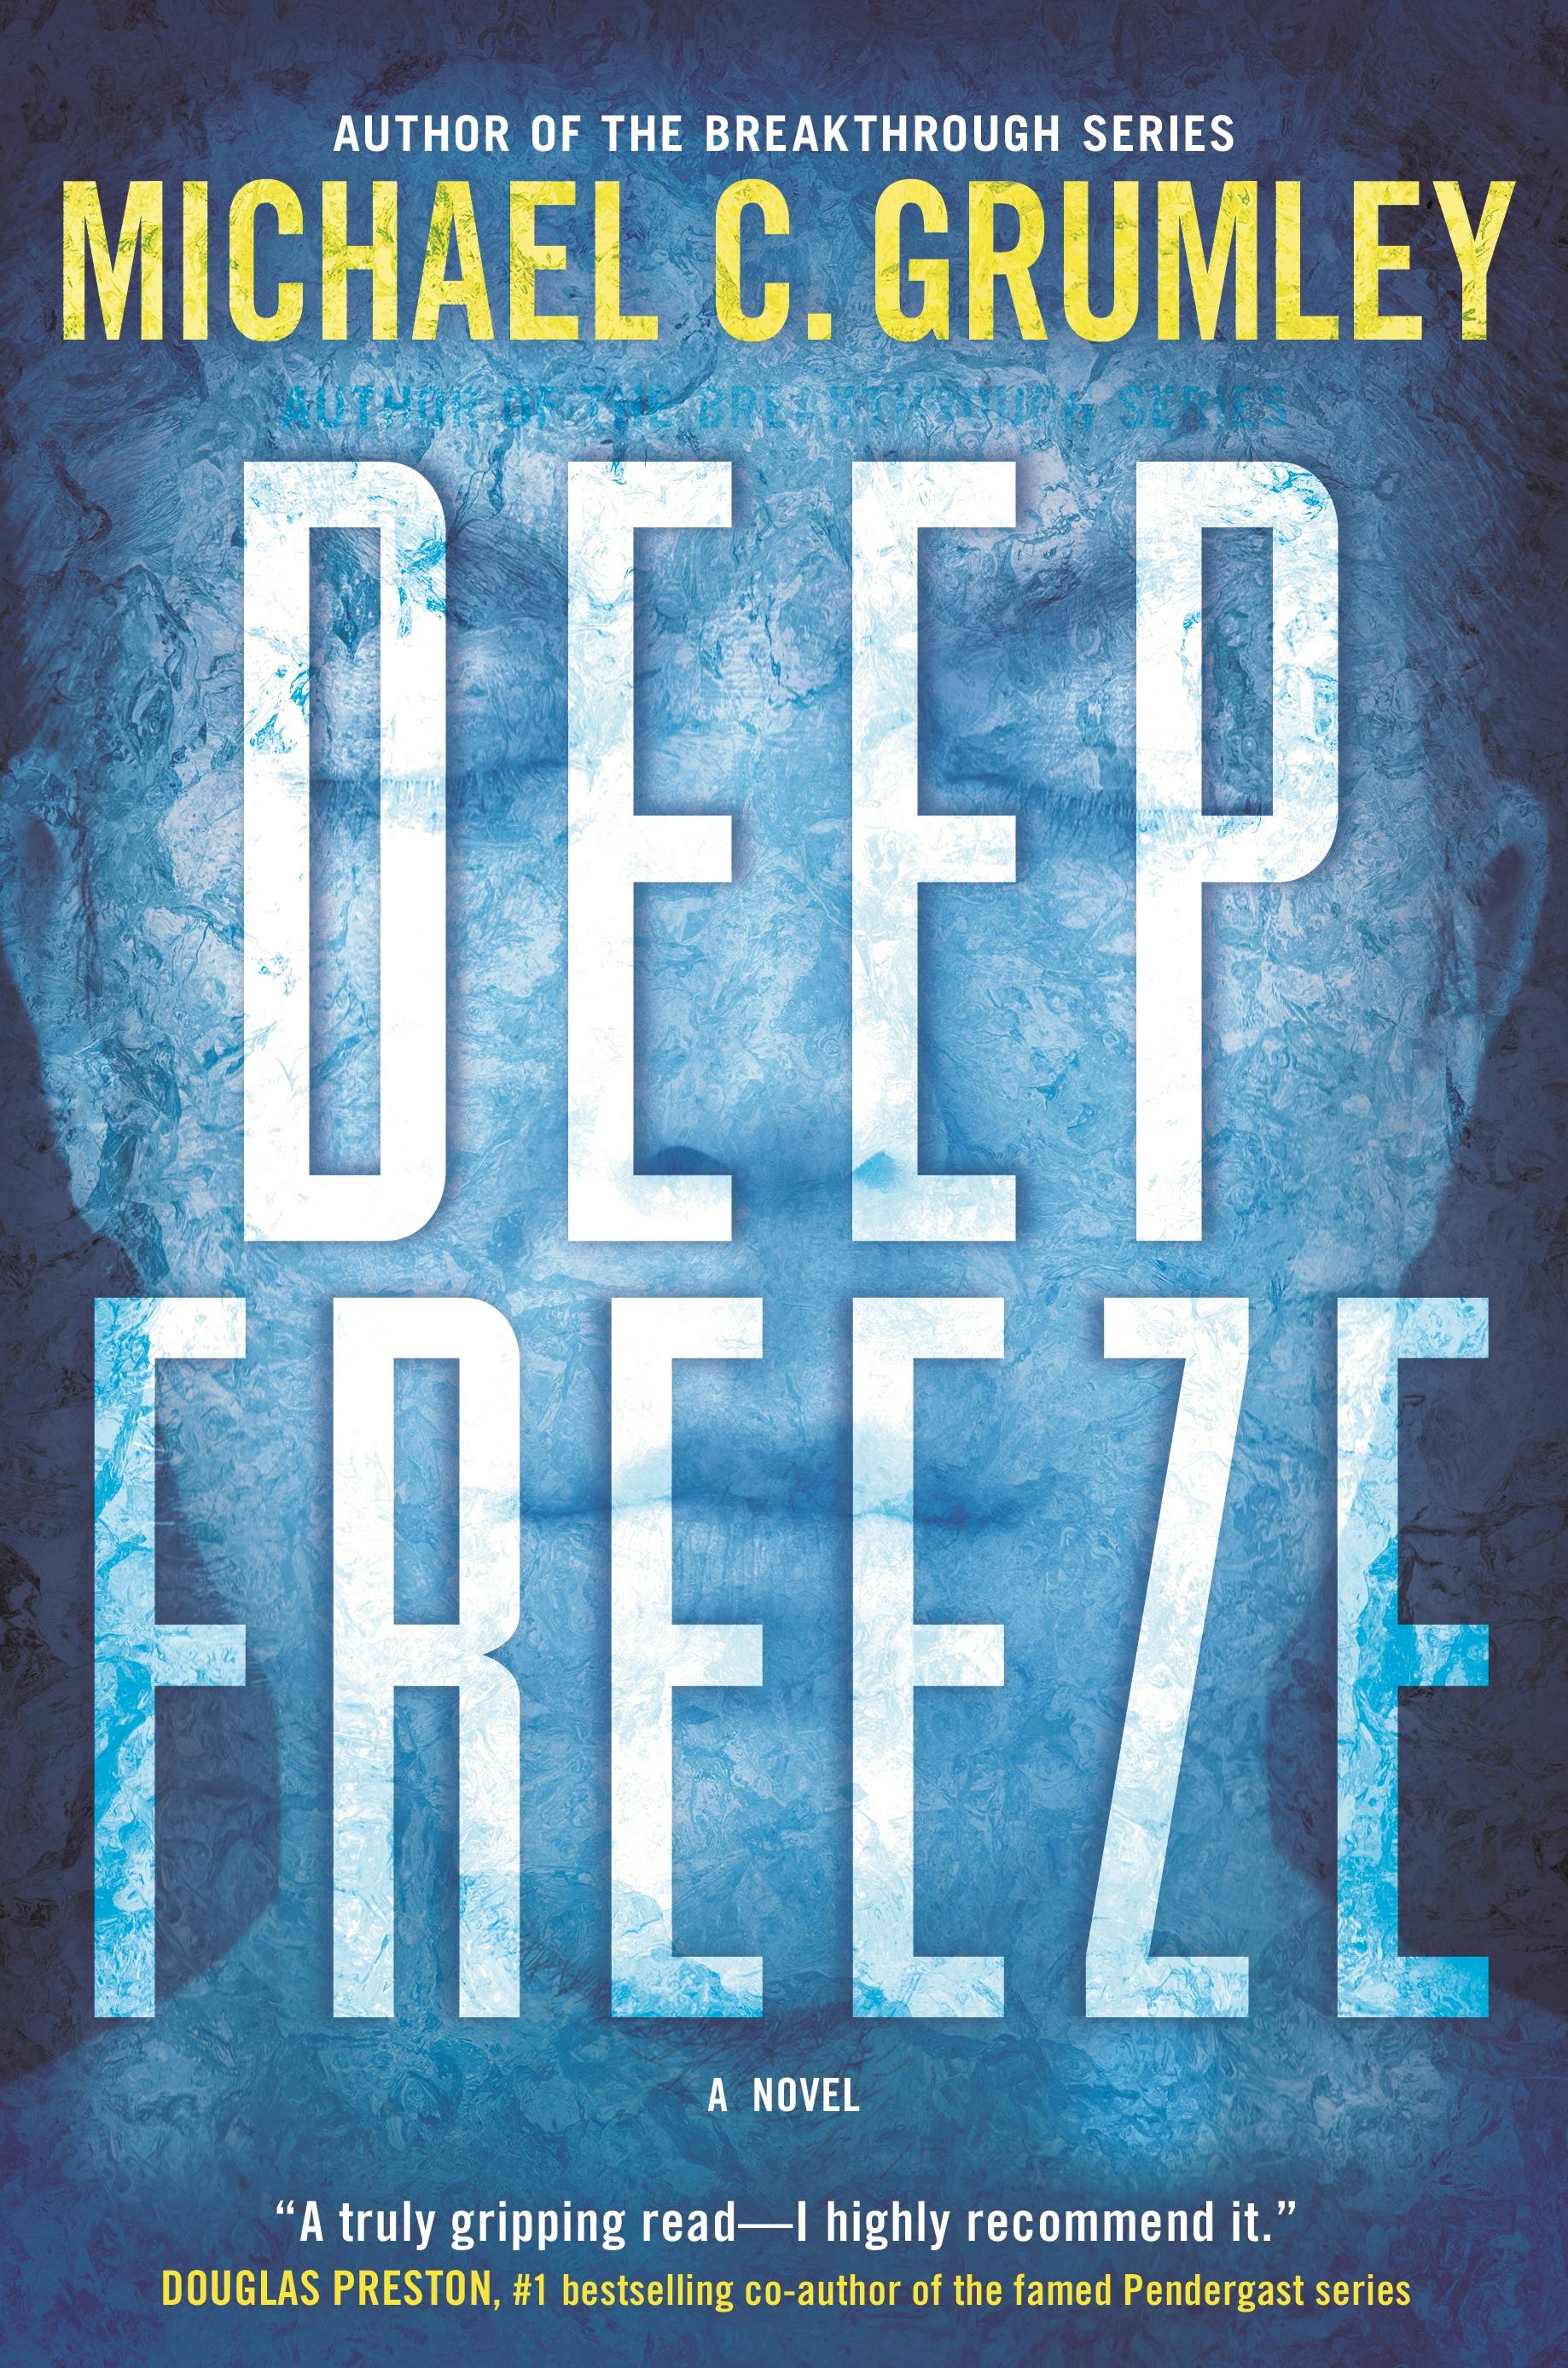 Cover for the book titled as: Deep Freeze